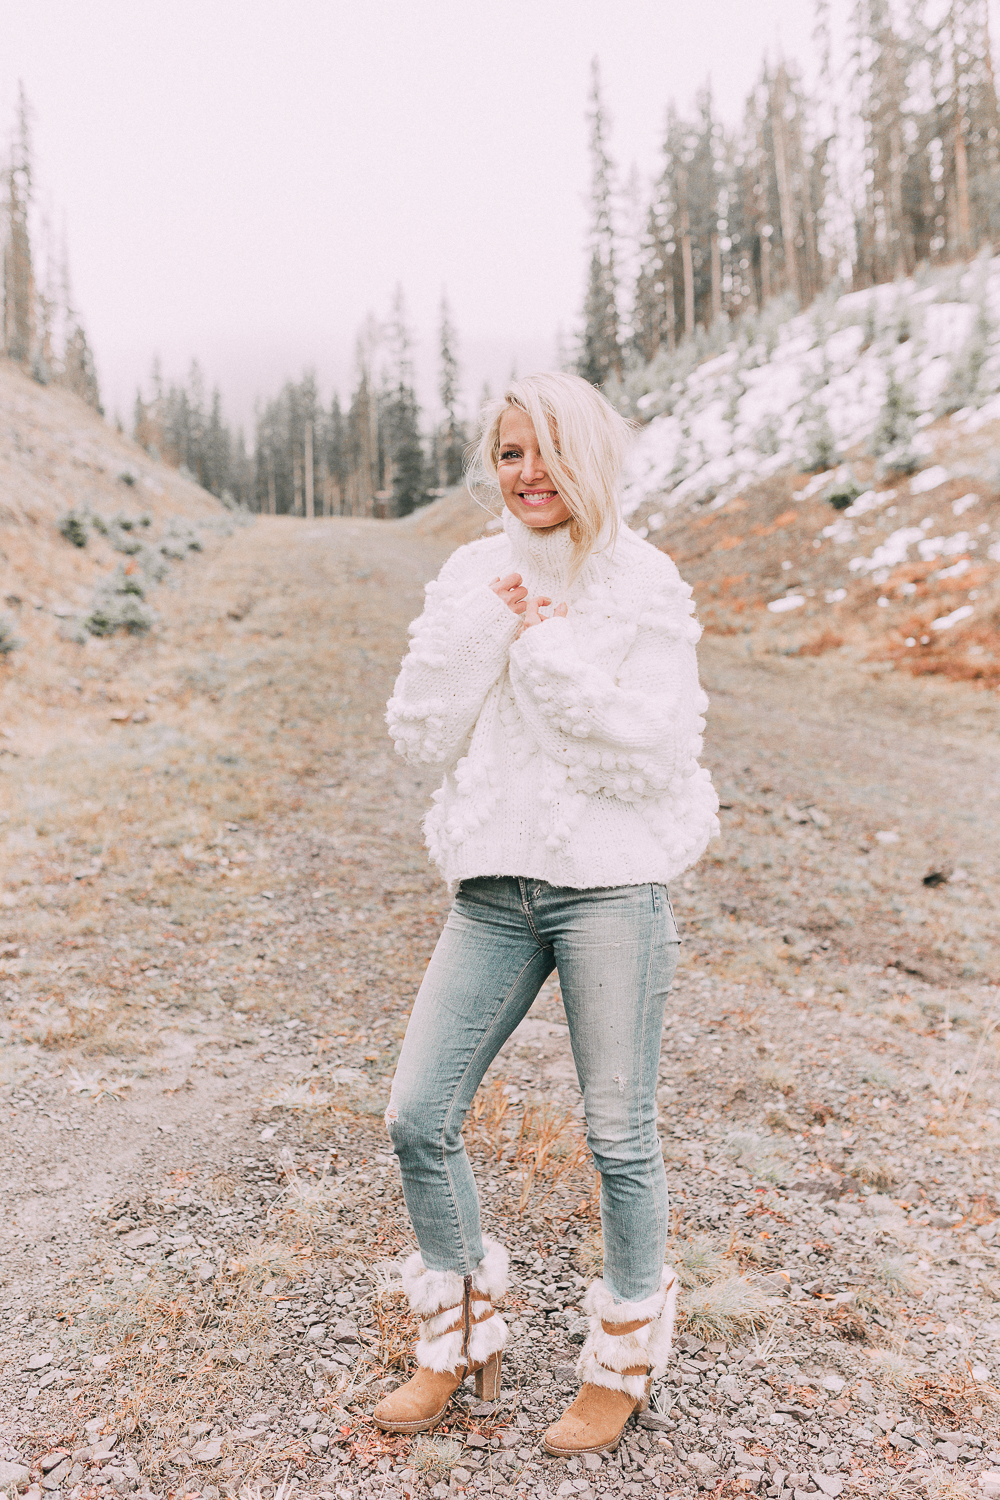 Cozy Sweaters | 4 Cozy Sweater outfit Ideas You Will Want to Live In